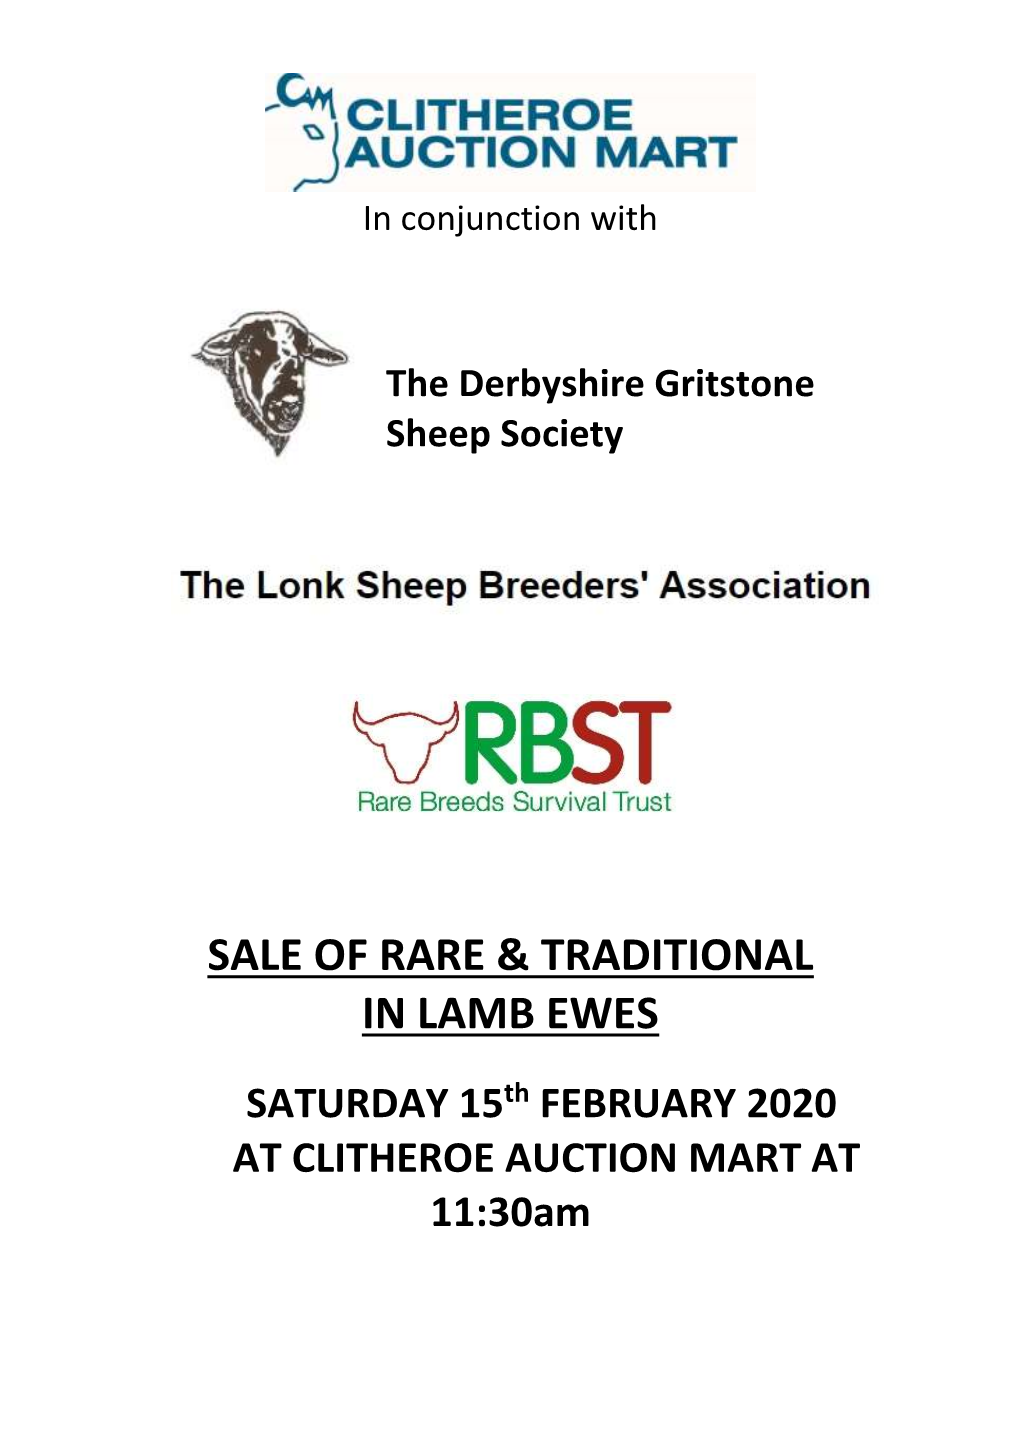 Sale of Rare & Traditional in Lamb Ewes